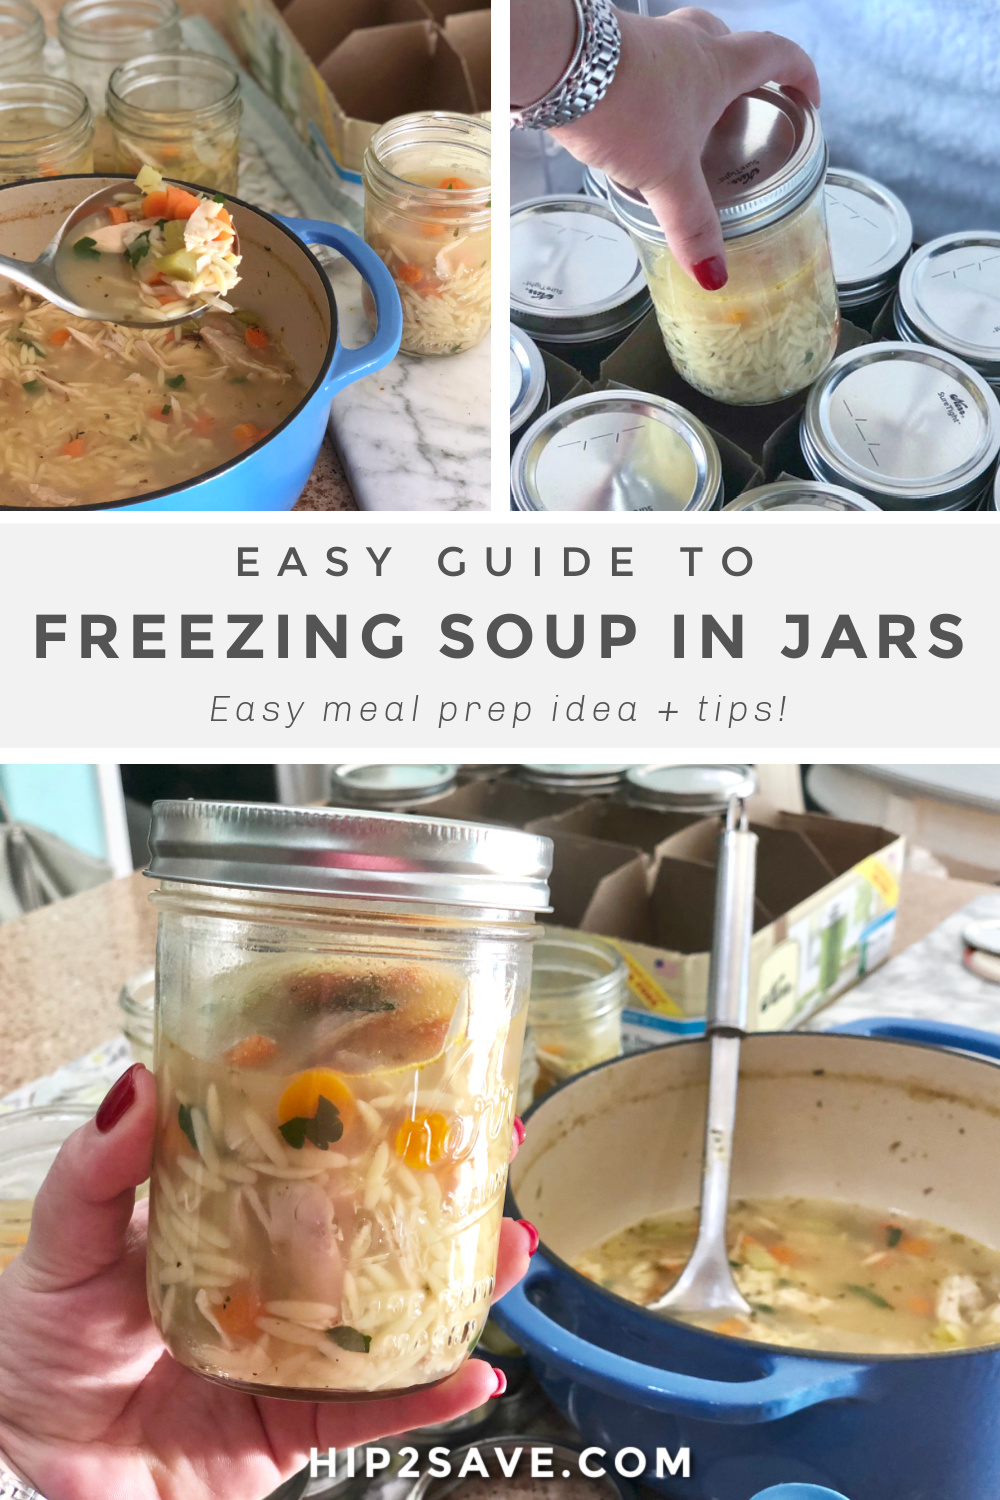 Can You Freeze Soup?